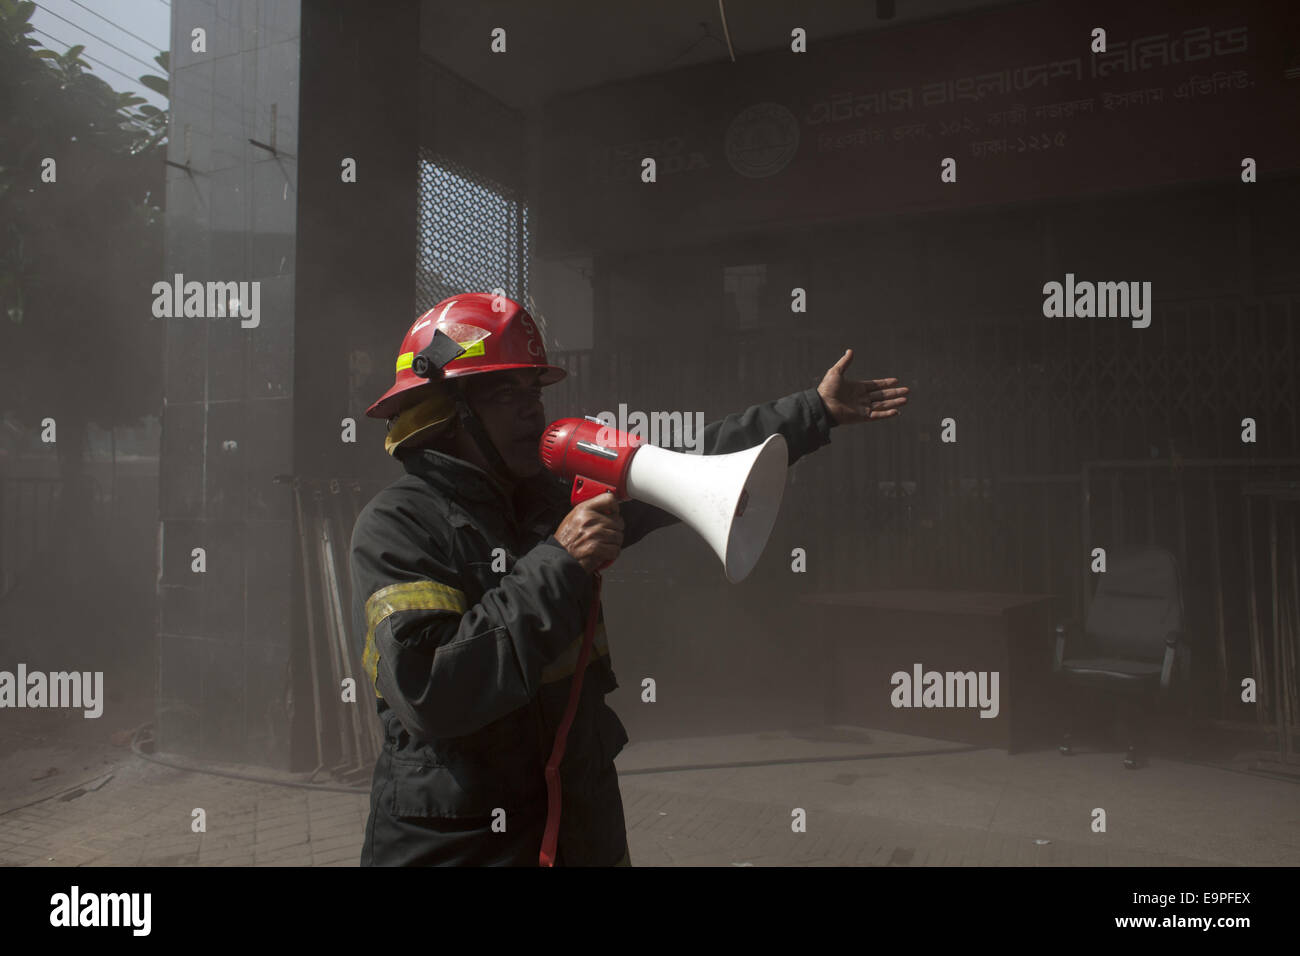 Dhaka, Bangladesh. 31st Oct, 2014. A devastating fire has broken out in the office of Bangla national daily Amar Desh housed at Bangladesh Steel and Engineering Corporation (BSEC) building in the capital's Kawran Bazar.Fire service sources said a total of 20 fire fighting units rushed to the scene, and are trying to bring the blaze under control.Earlier on Feb 26, 2007, offices of 10 institutions including media units the NTV, RTV and Amar Desh were destroyed in a fire incident at the same building. Credit:  Zakir Hossain Chowdhury/ZUMA Wire/Alamy Live News Stock Photo